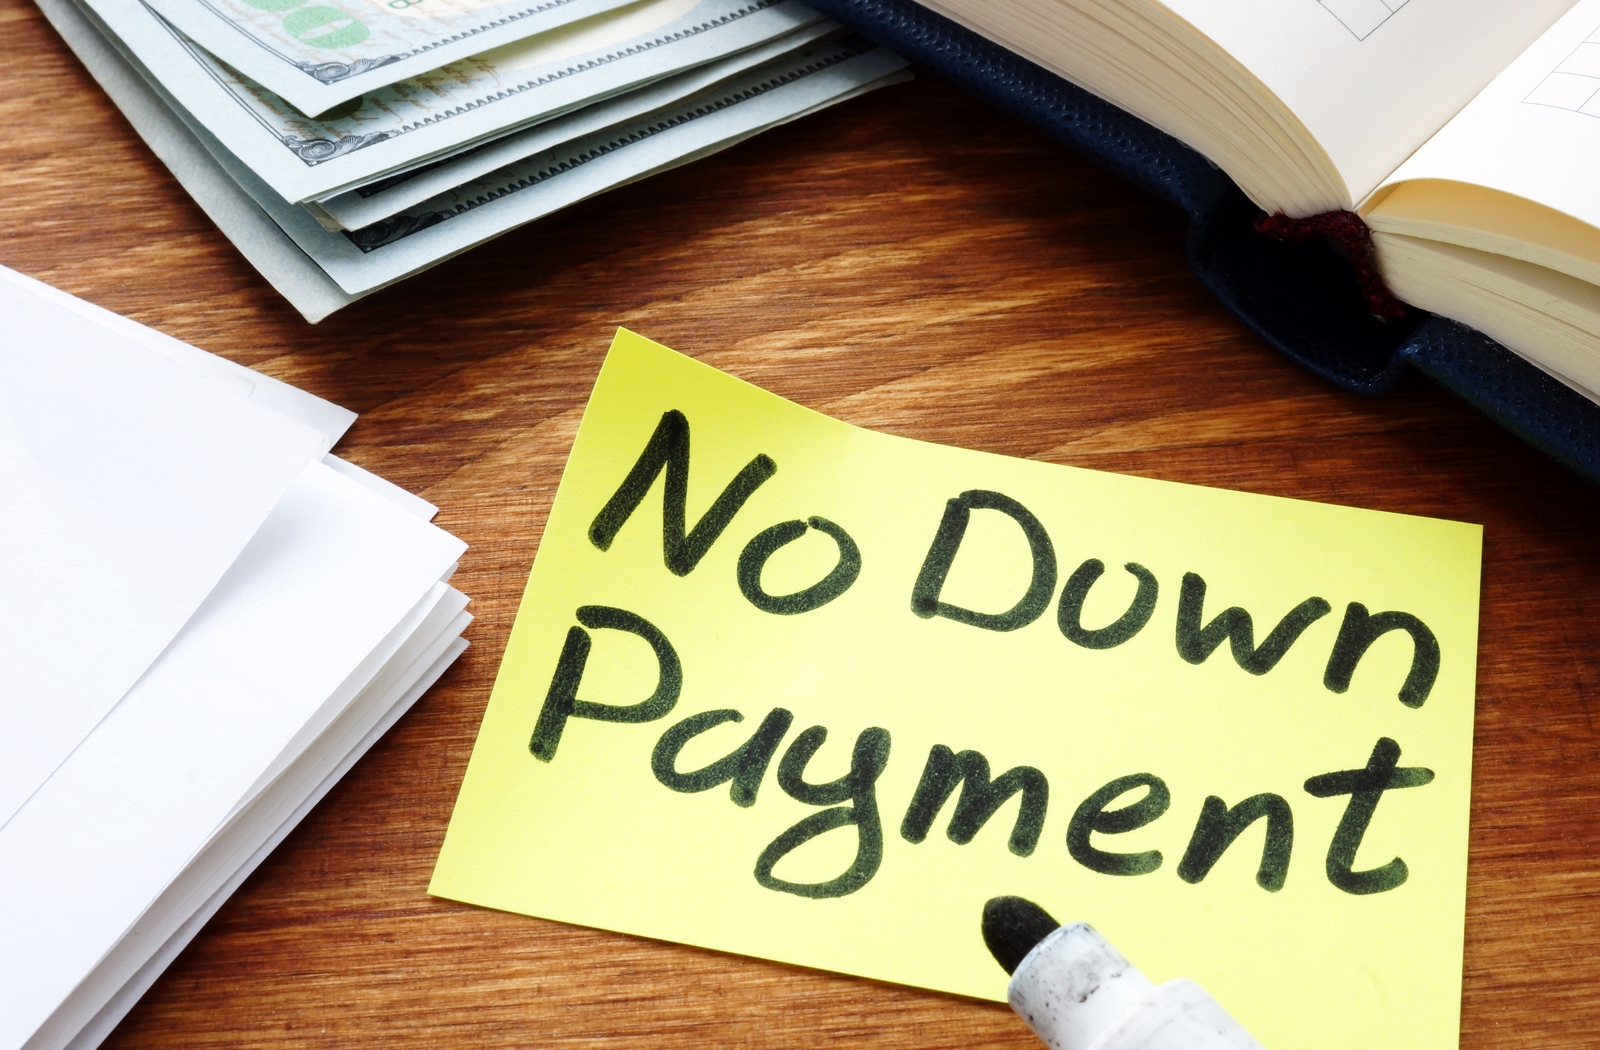 A note laying on a desk with a sharpie that has written "no down payment" on it, surrounded by different pieces of paper and an open book